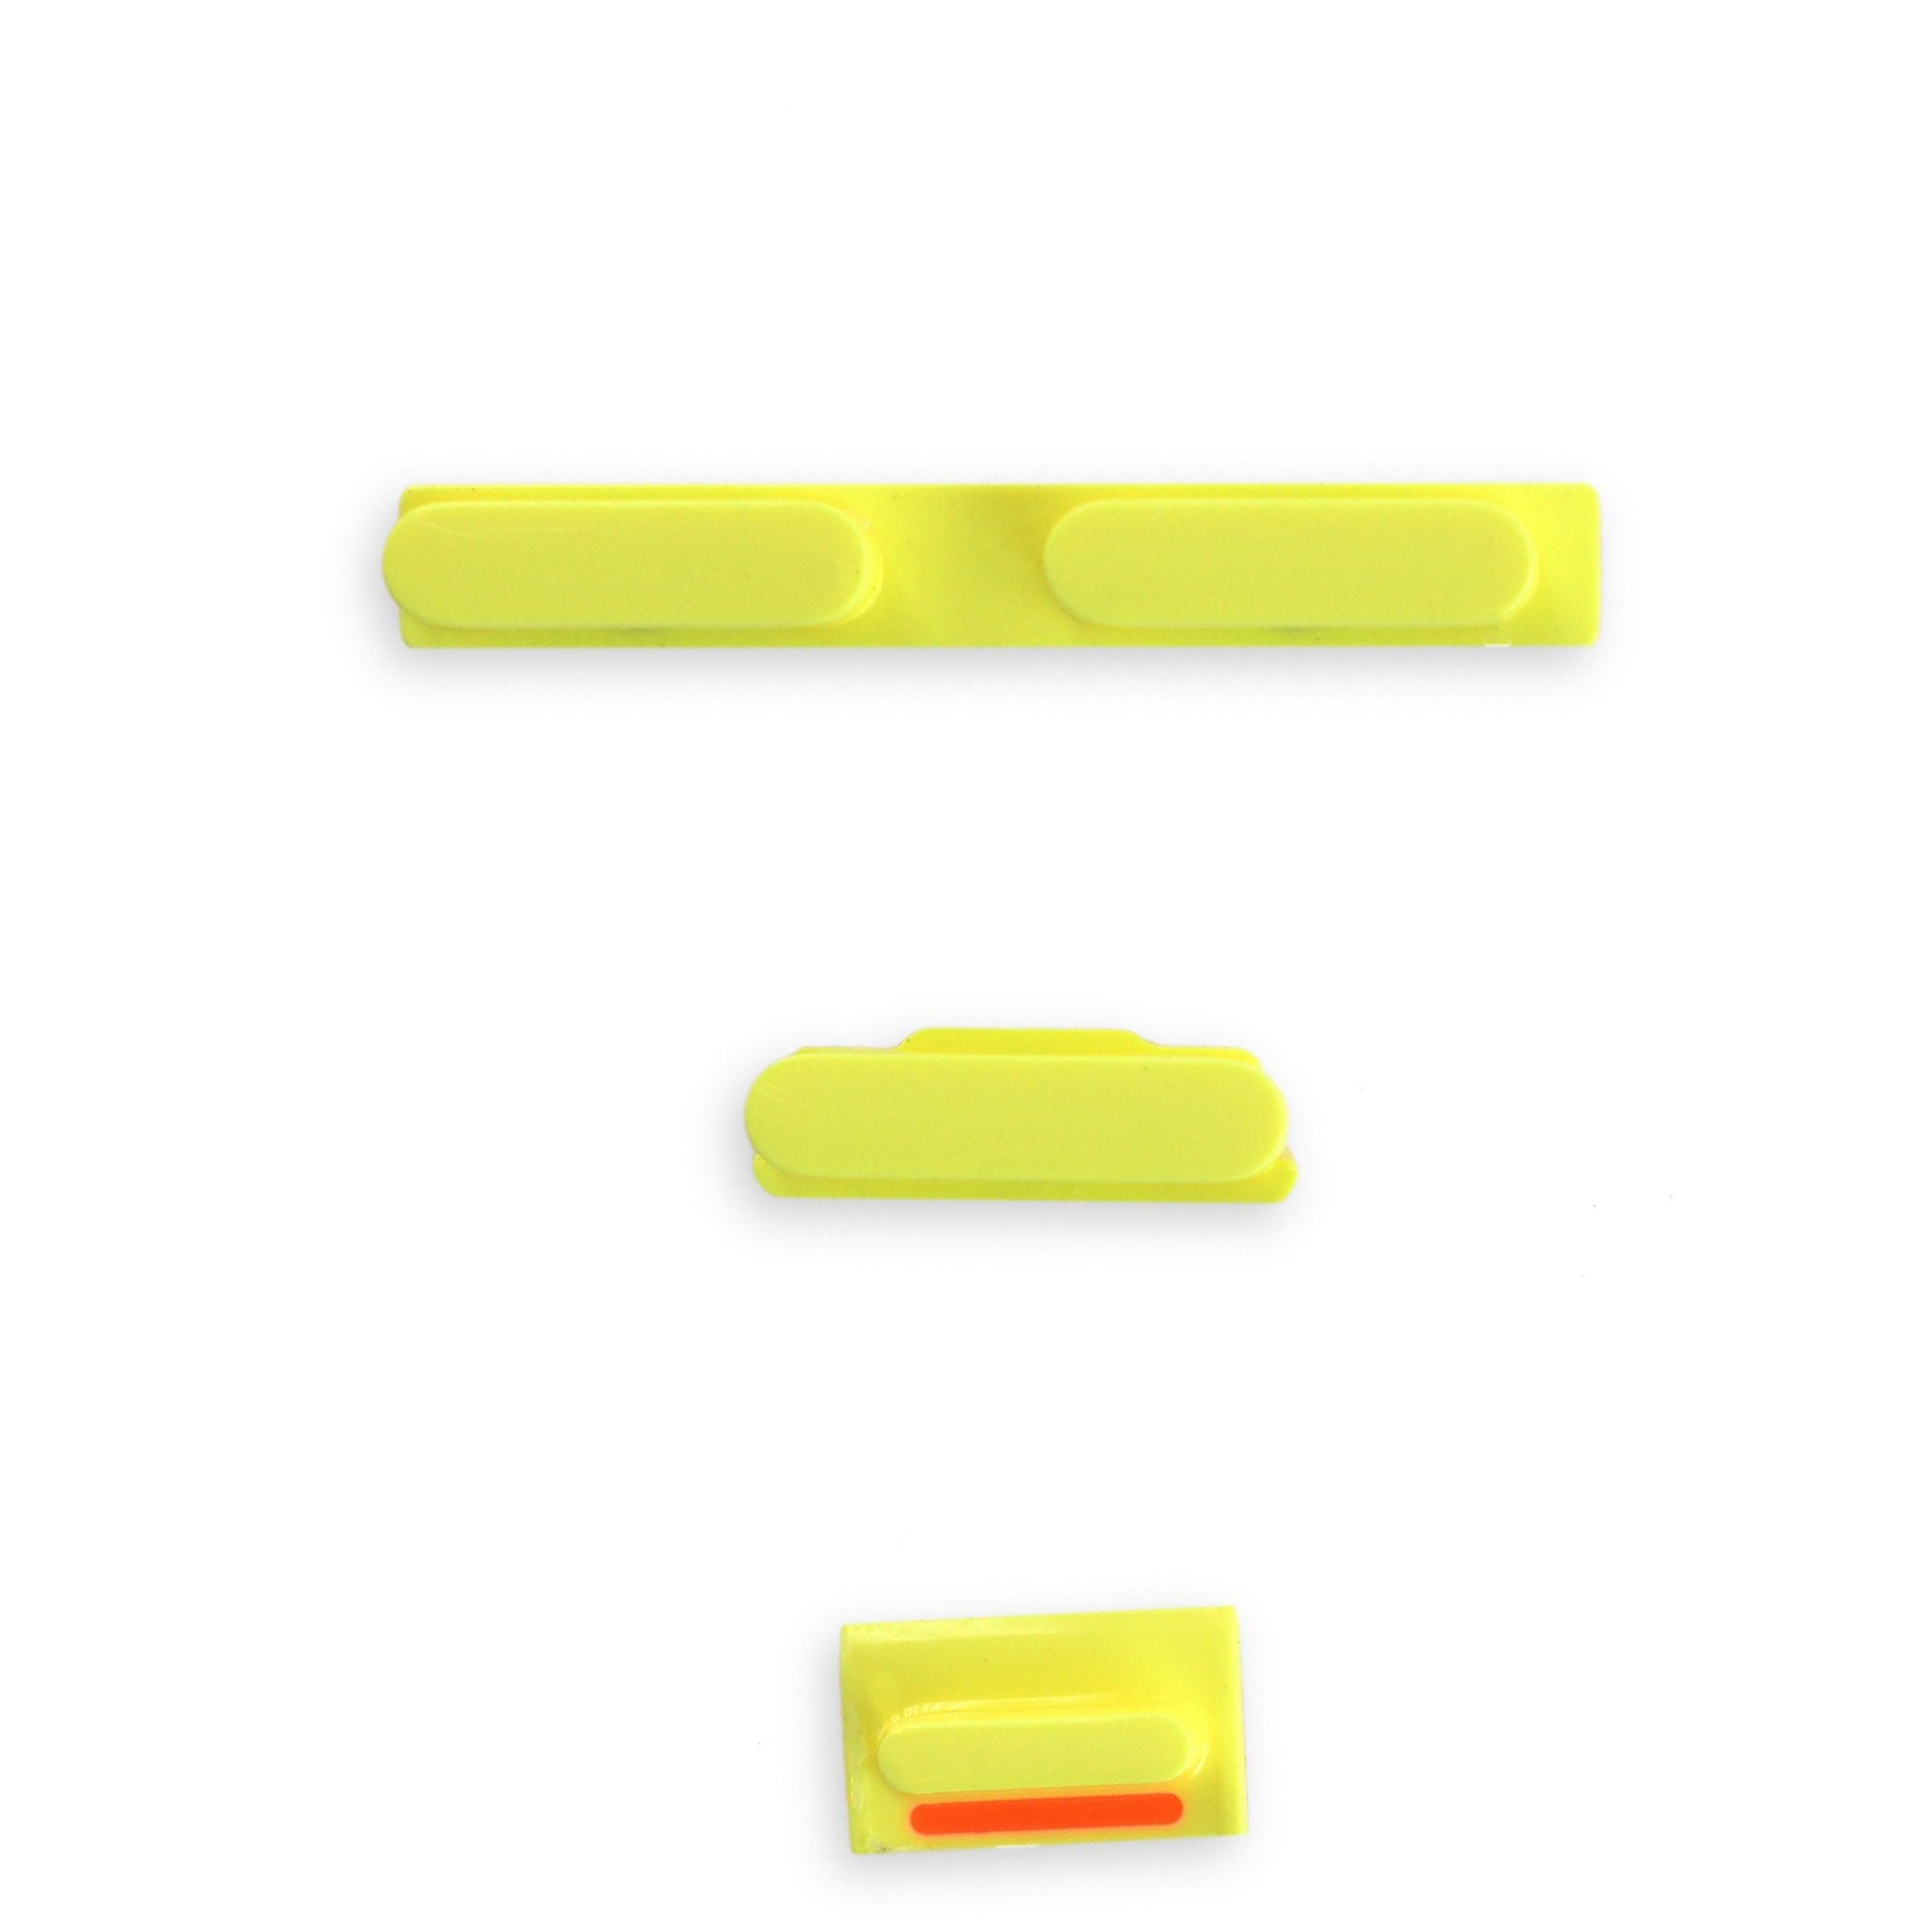 iPhone 5c Case Button Set Yellow New